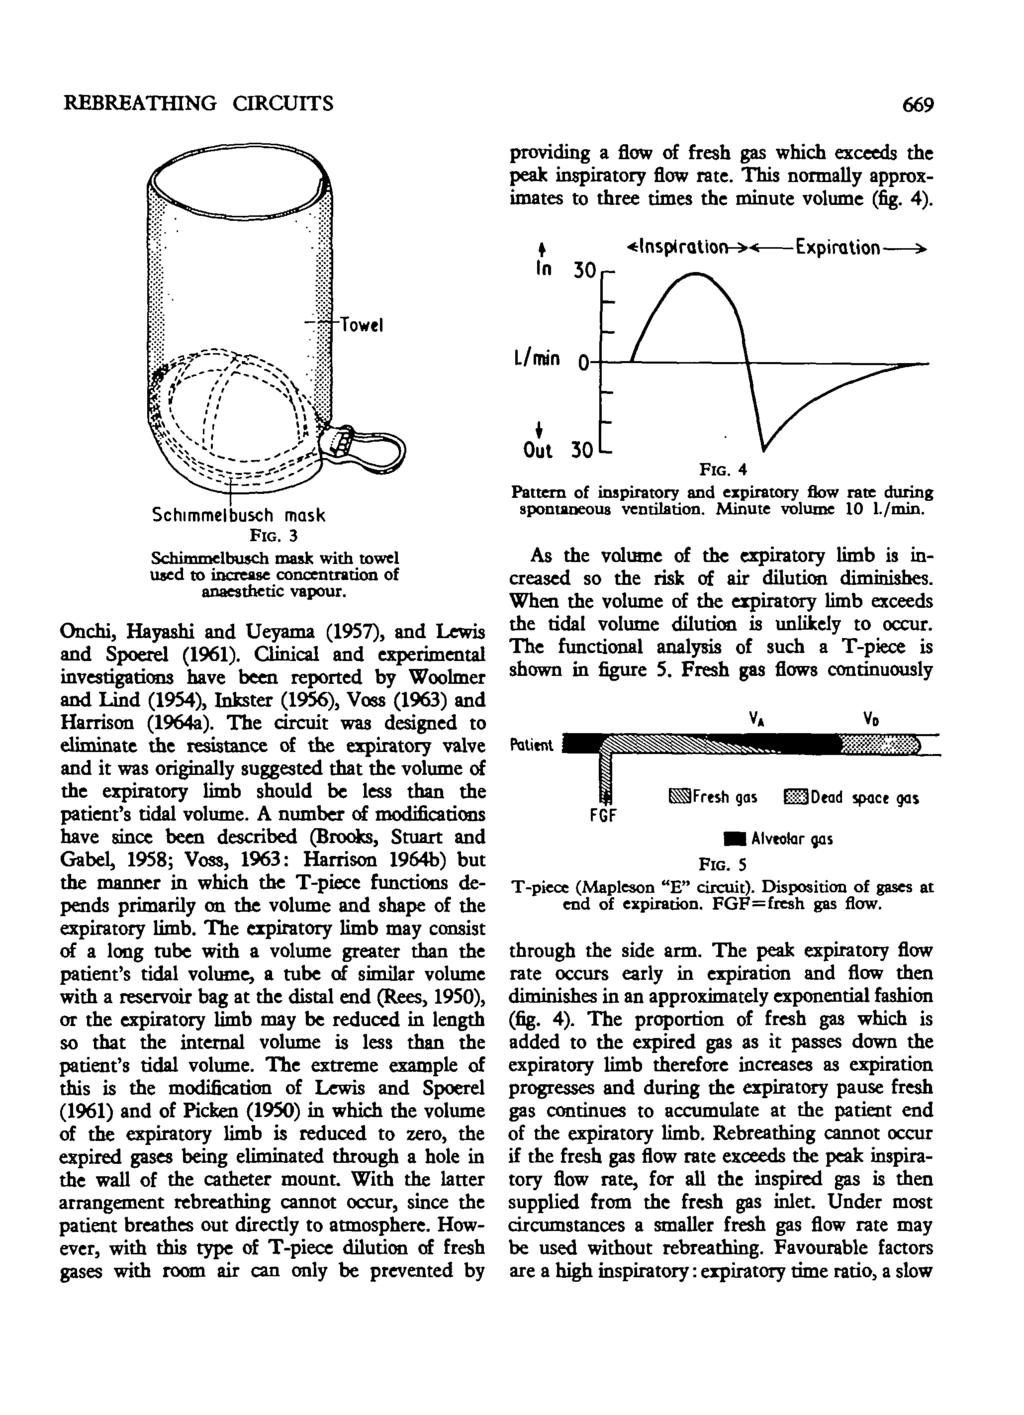 REBREATHING CIRCUITS 669 providing a flow of fresh gas which exceeds the peak inspiratory flow rate. This normally approximates to three times the minute volume (fig. 4).